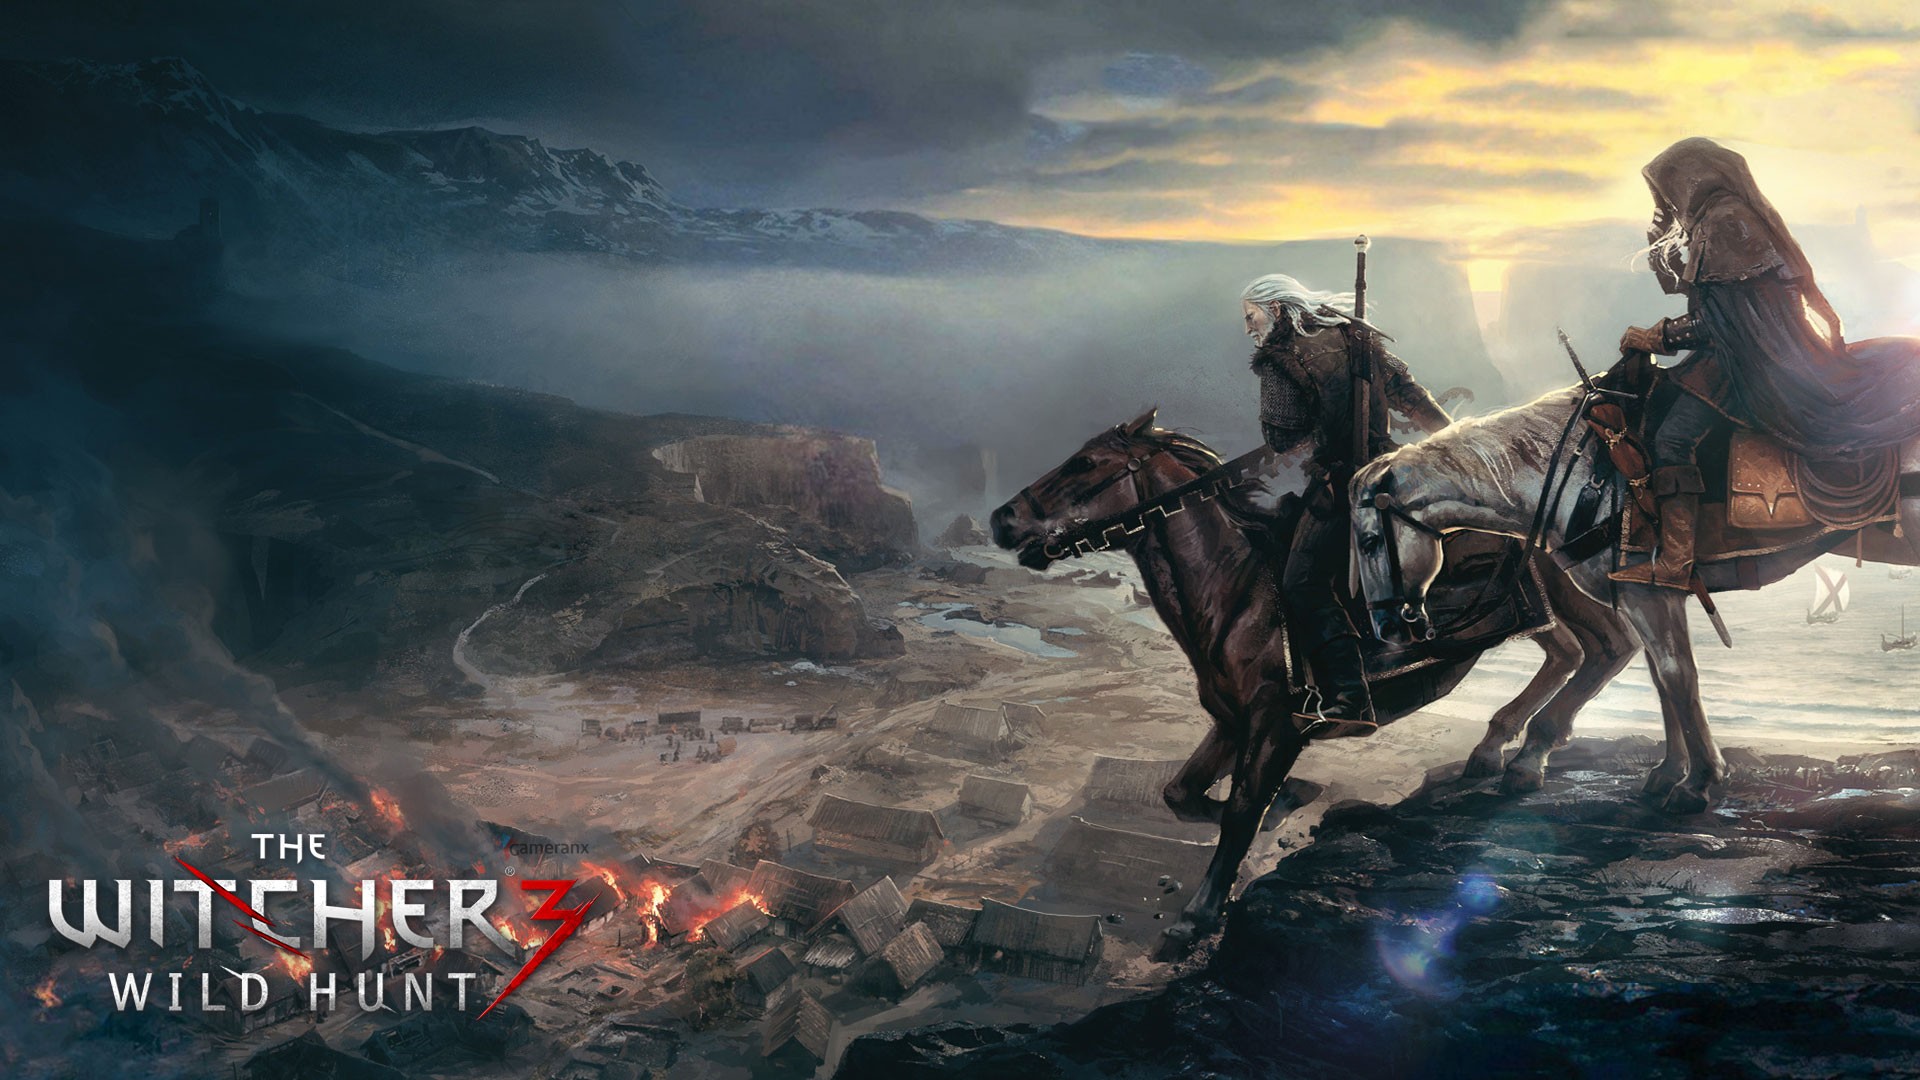 The Witcher 3 Wild Hunt The Witcher Wallpapers Hd Desktop And Mobile Backgrounds